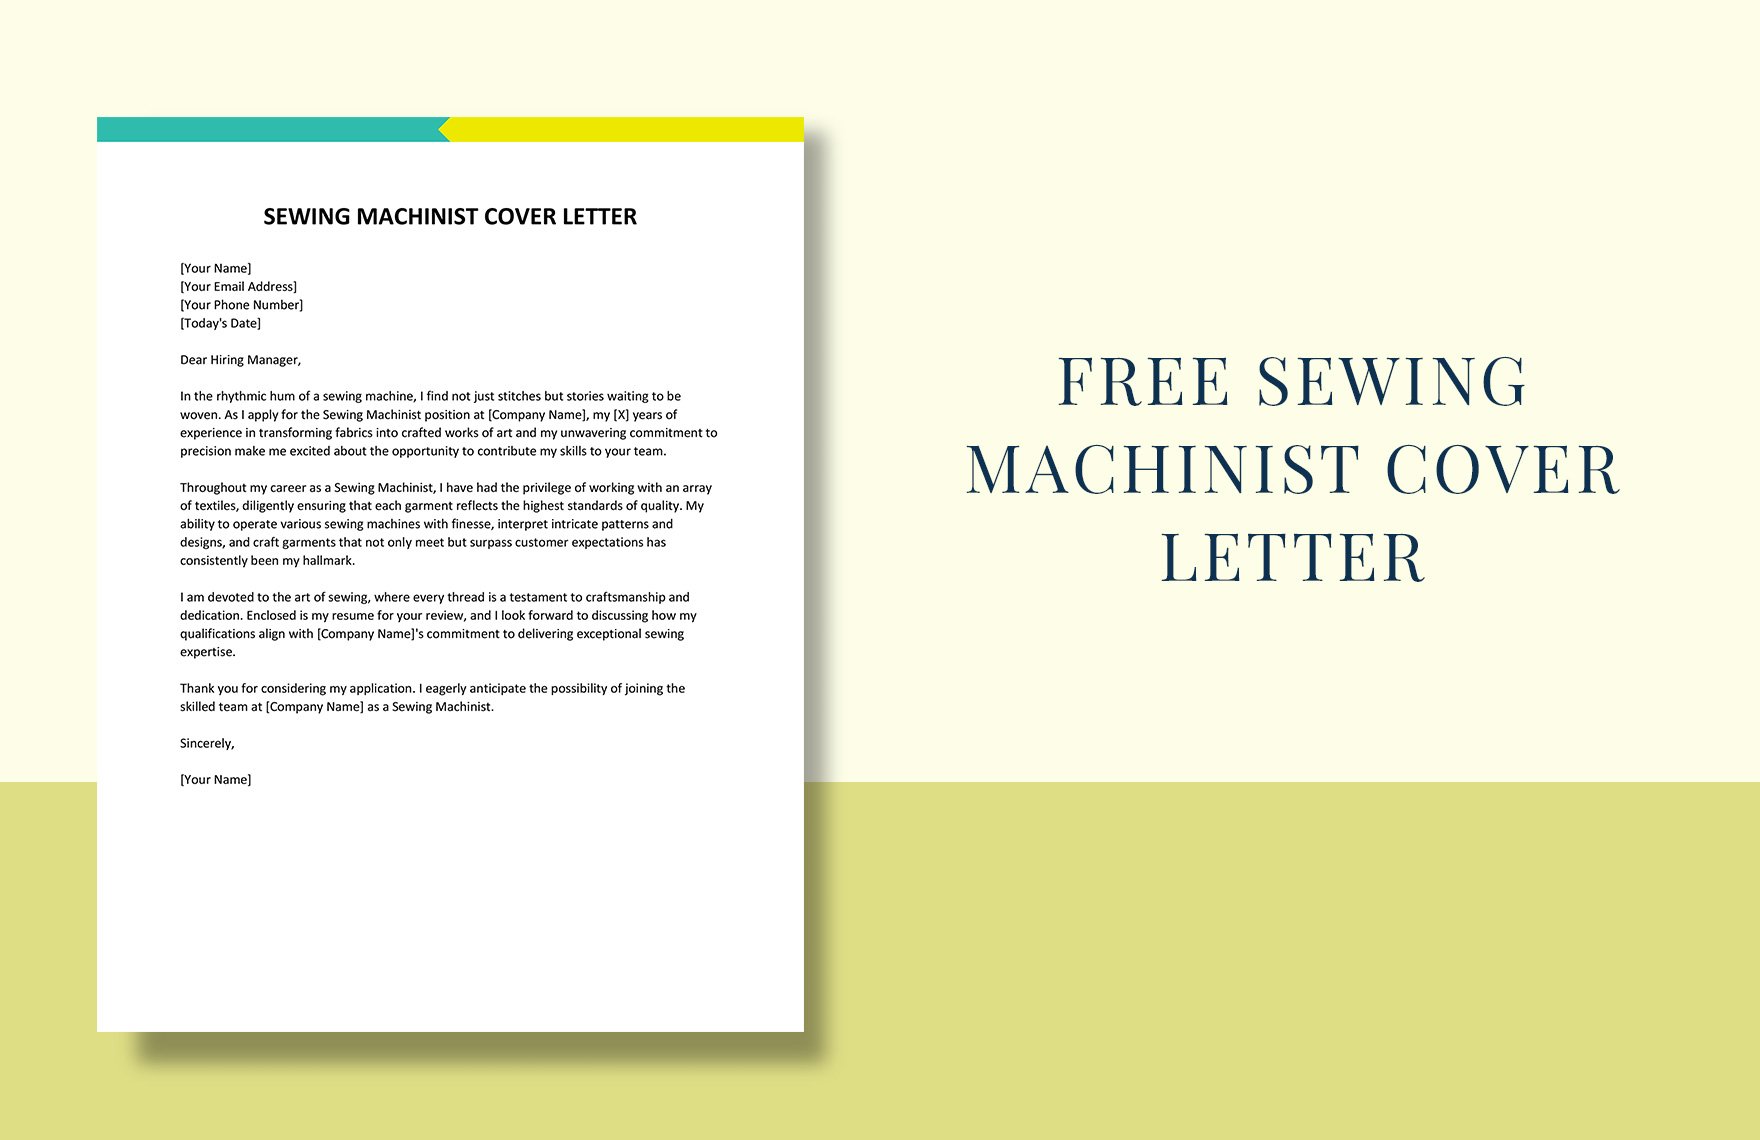 sewing-machinist-cover-letter